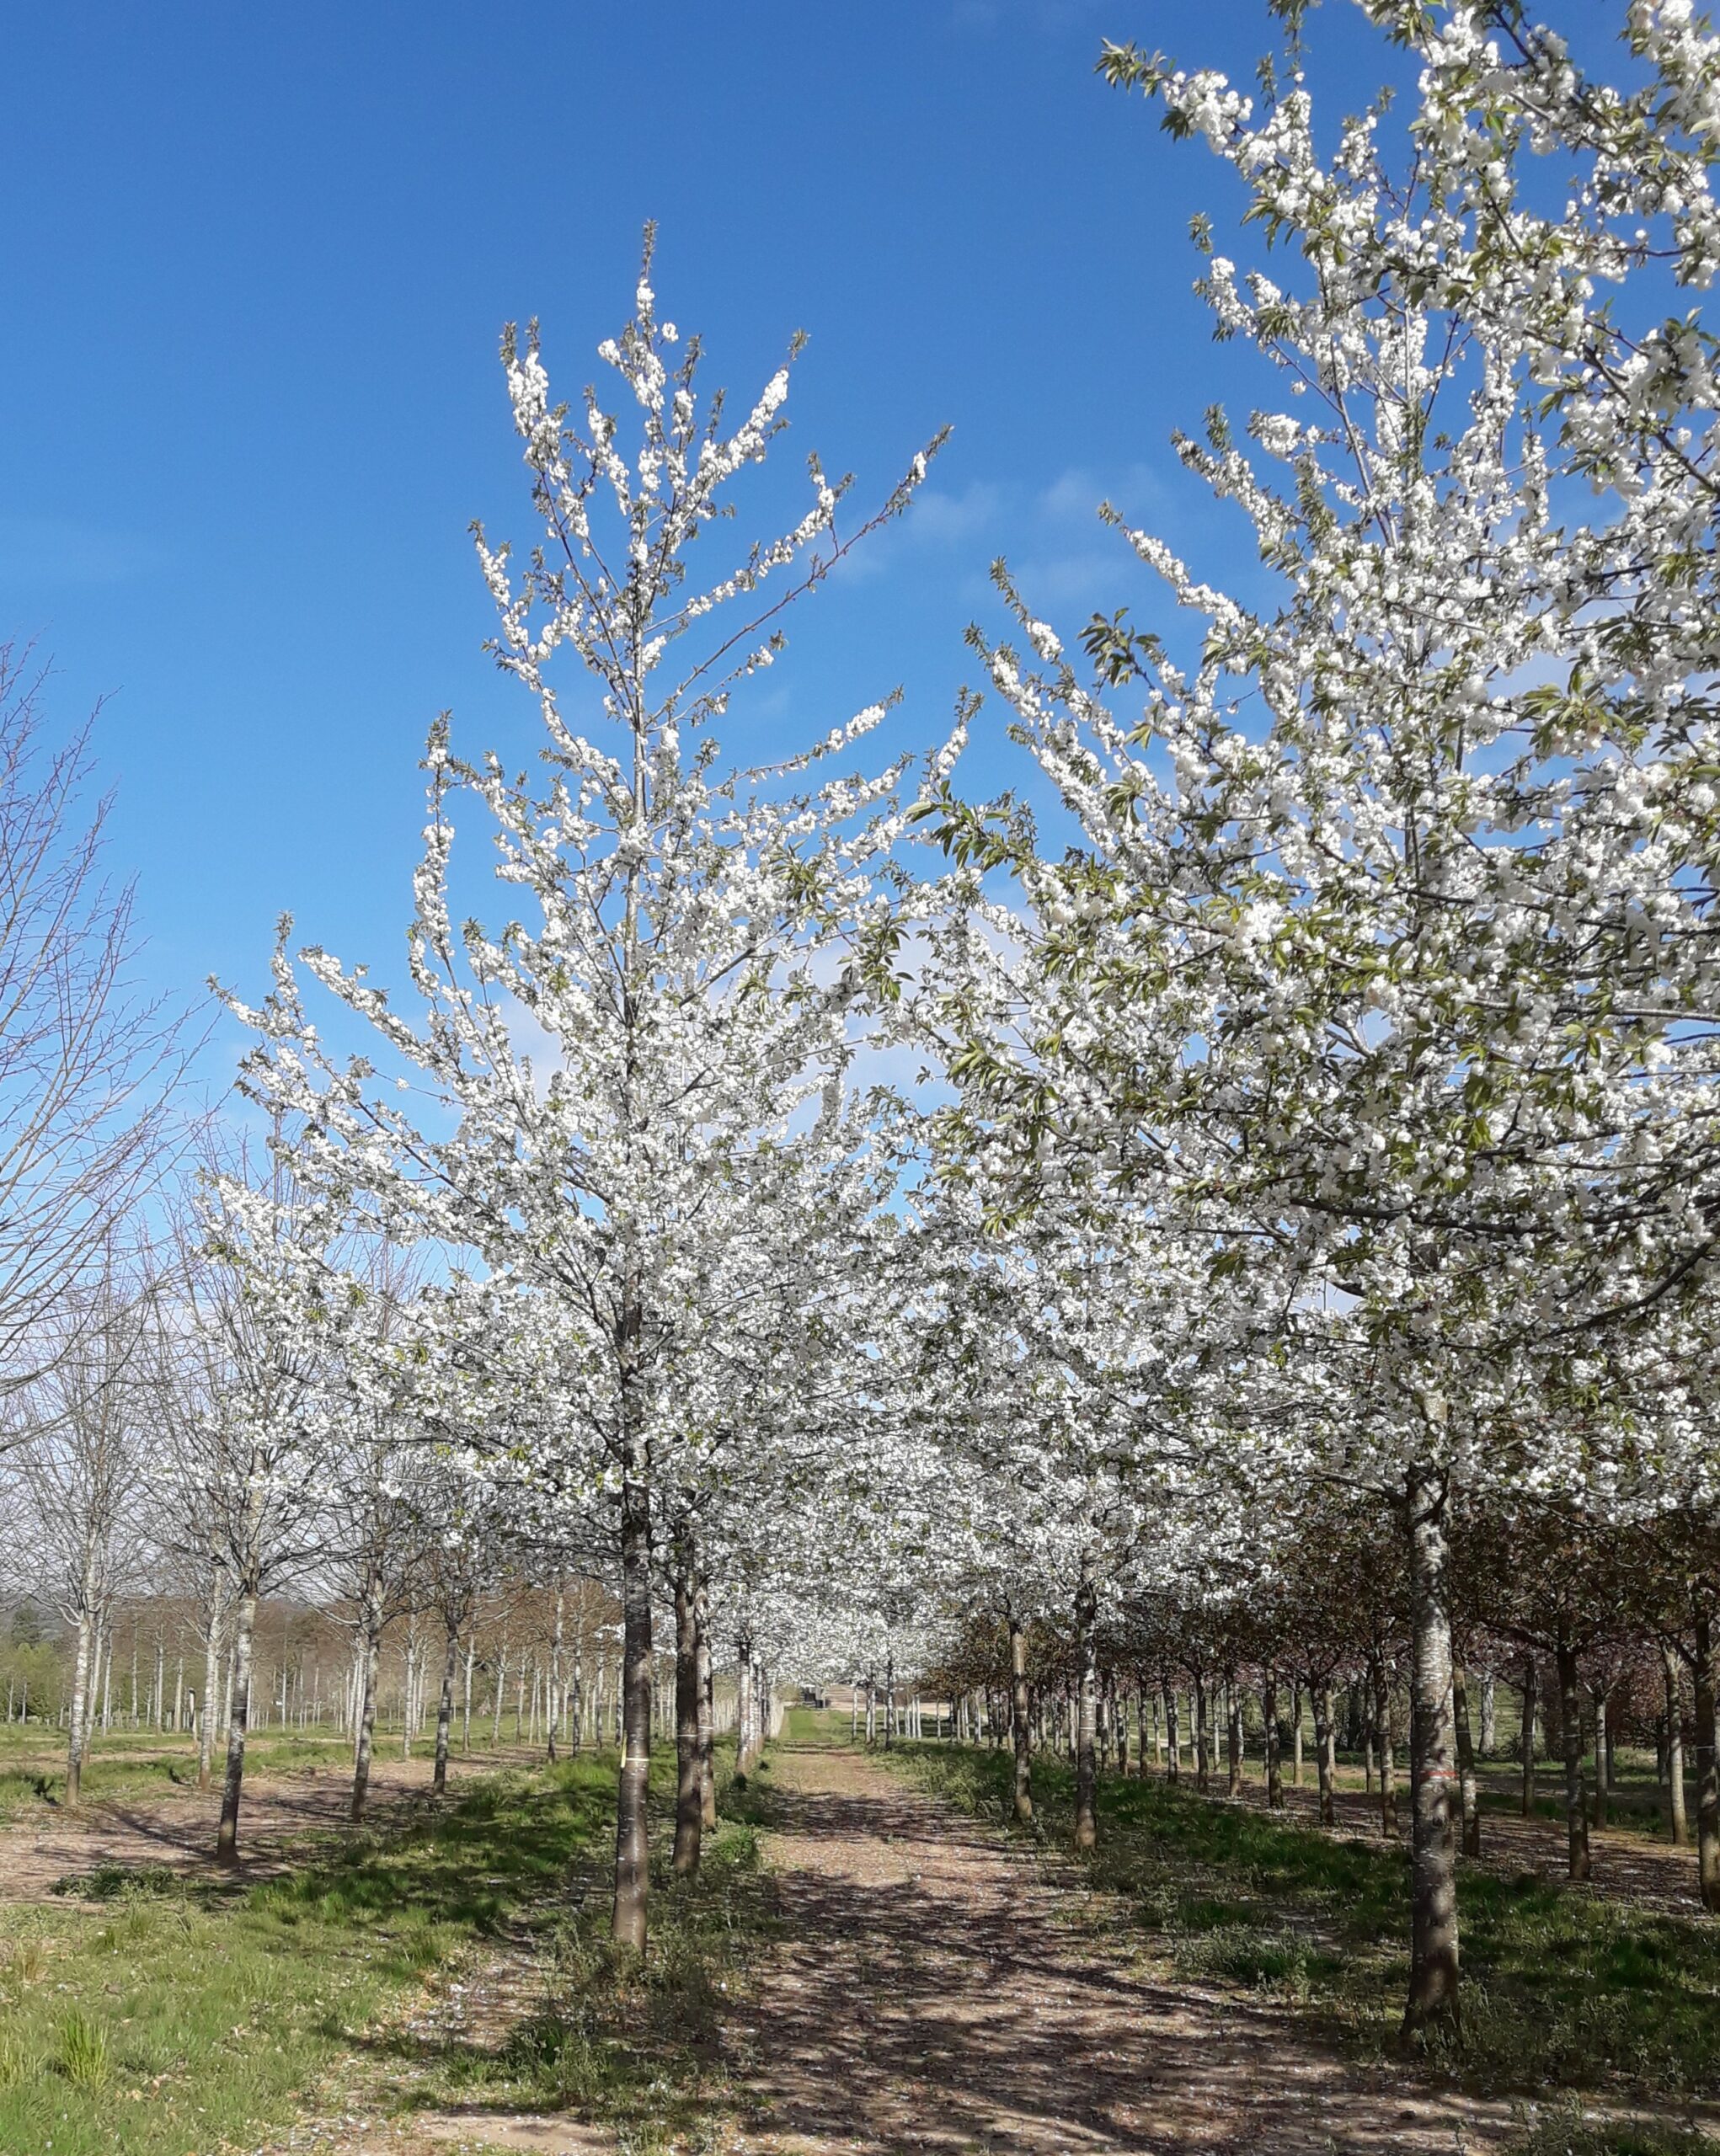 Prunus avium Plena semi mature trees growing in rows in a field with blossom